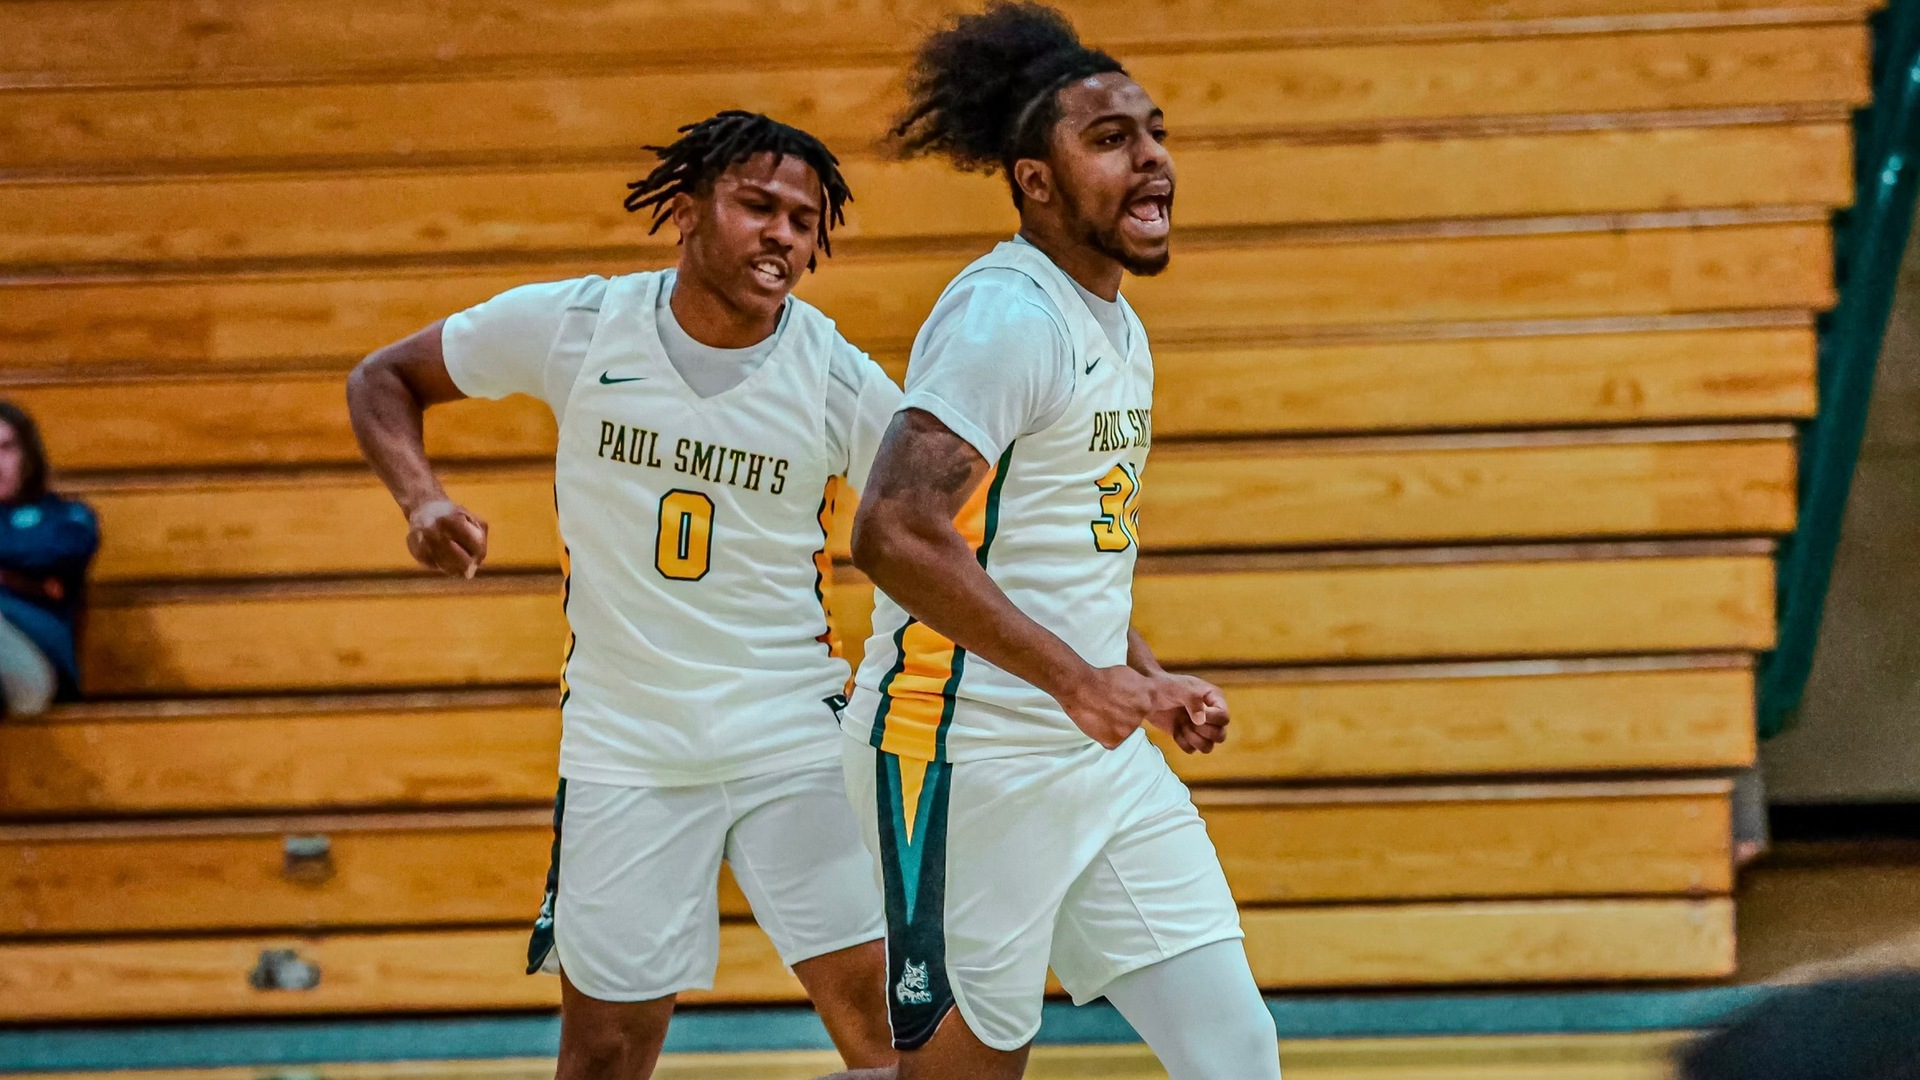 Elijiah Pratt (left) and Brian Foster (right) celebrate during a recent game. (Mercedes Rideout photo) Thumbnail